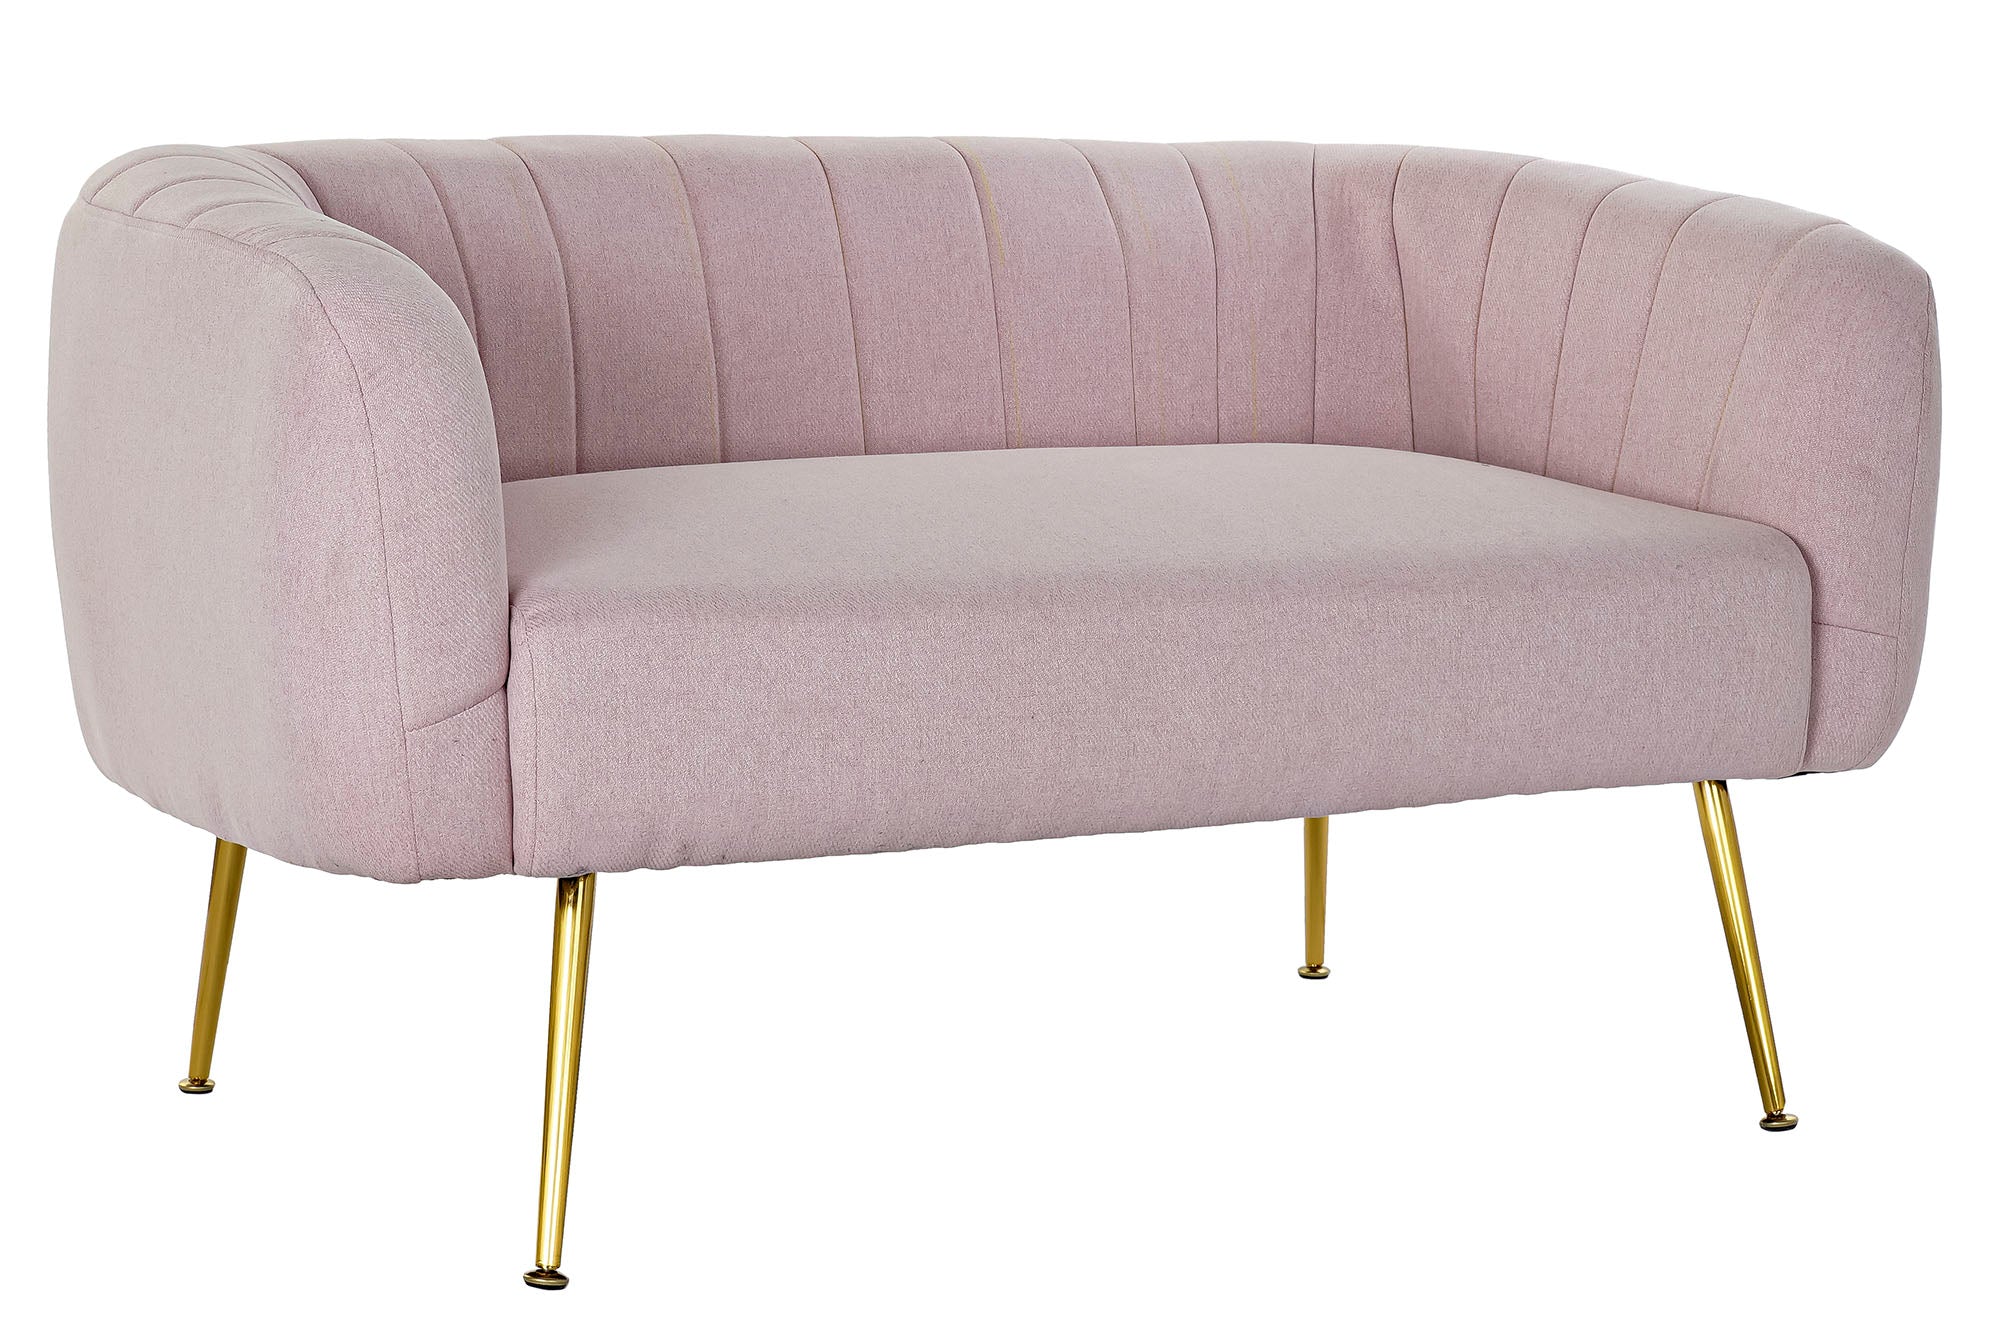 Contemporary Sofa Pink and Gold Metal Home Decor